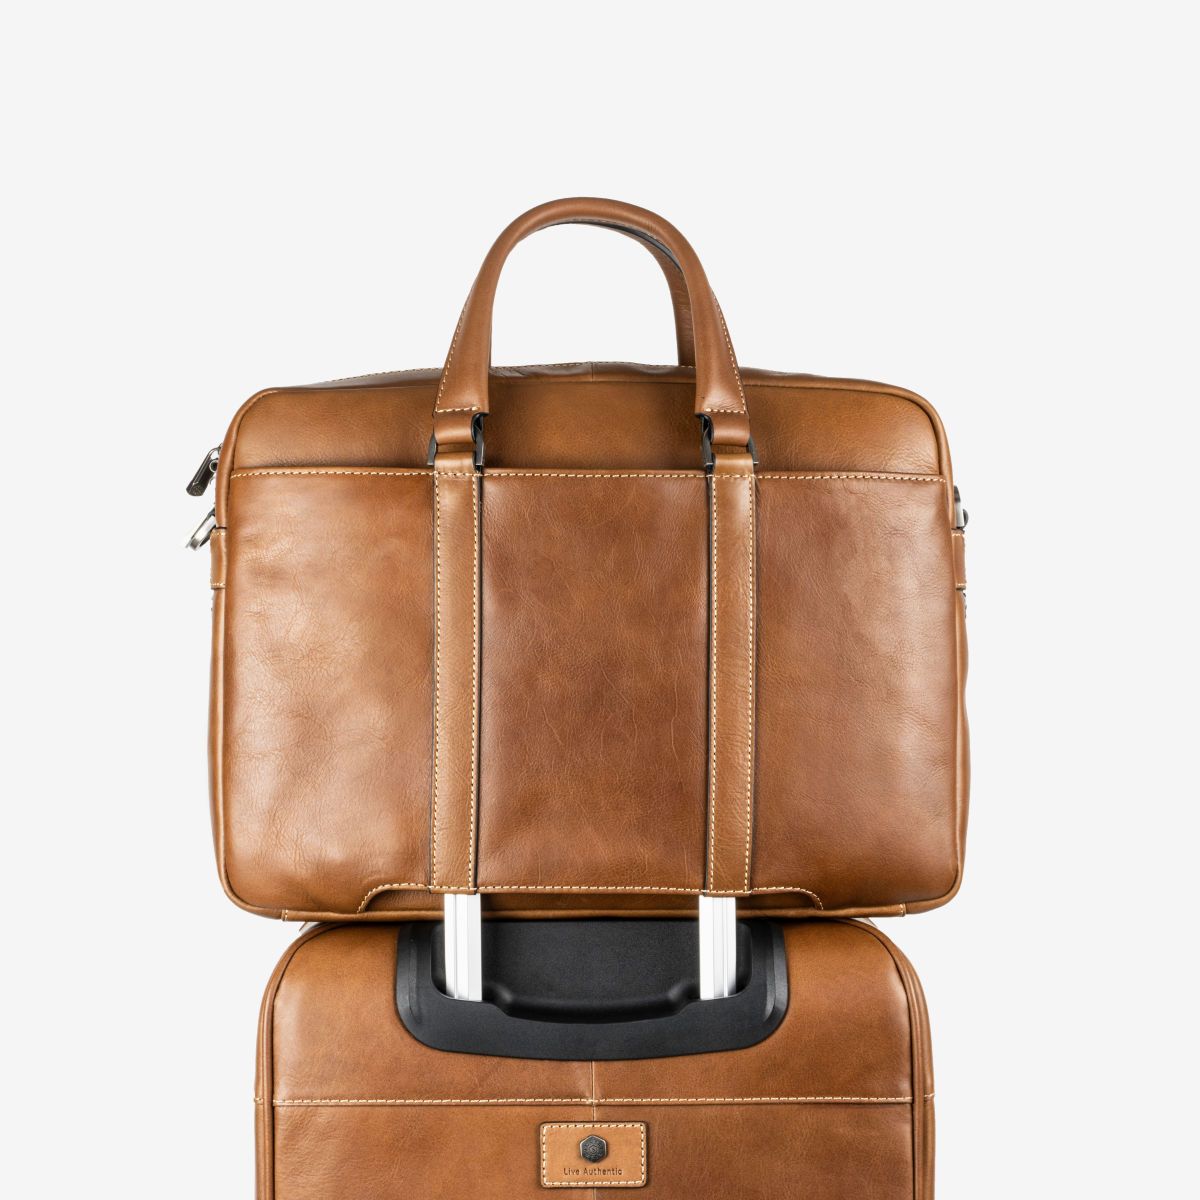 Jekyll &amp; Hide laptop case shown with a matching leather rolly-suitcase